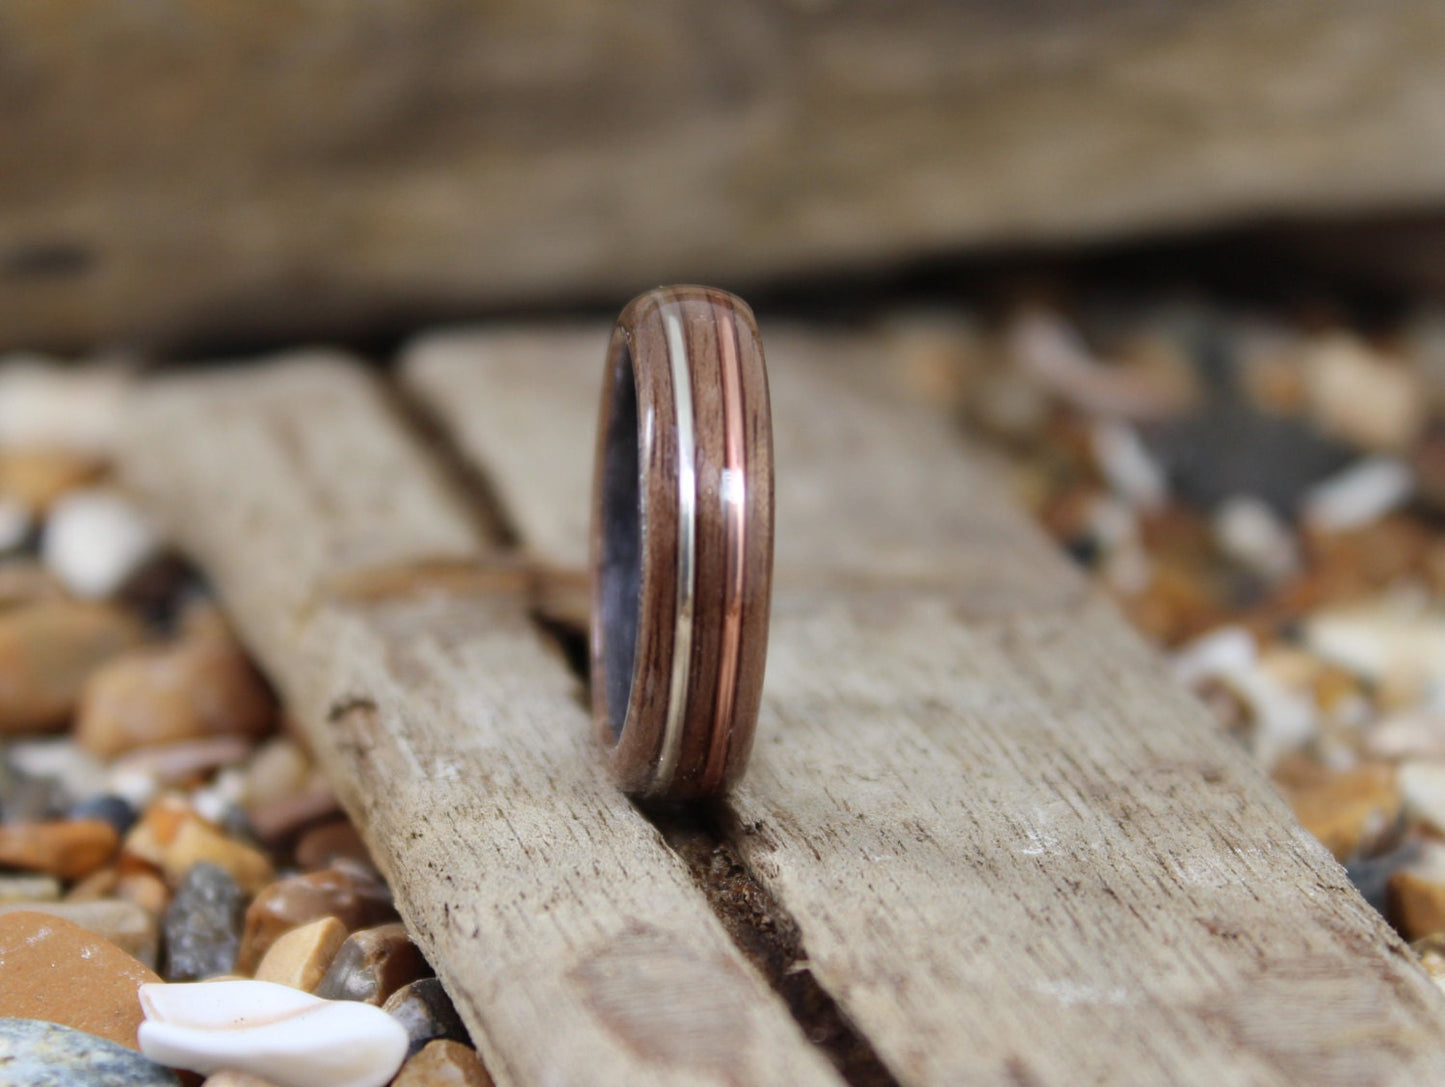 Grey Maple & Walnut with Copper and Silver Bent Wood Ring